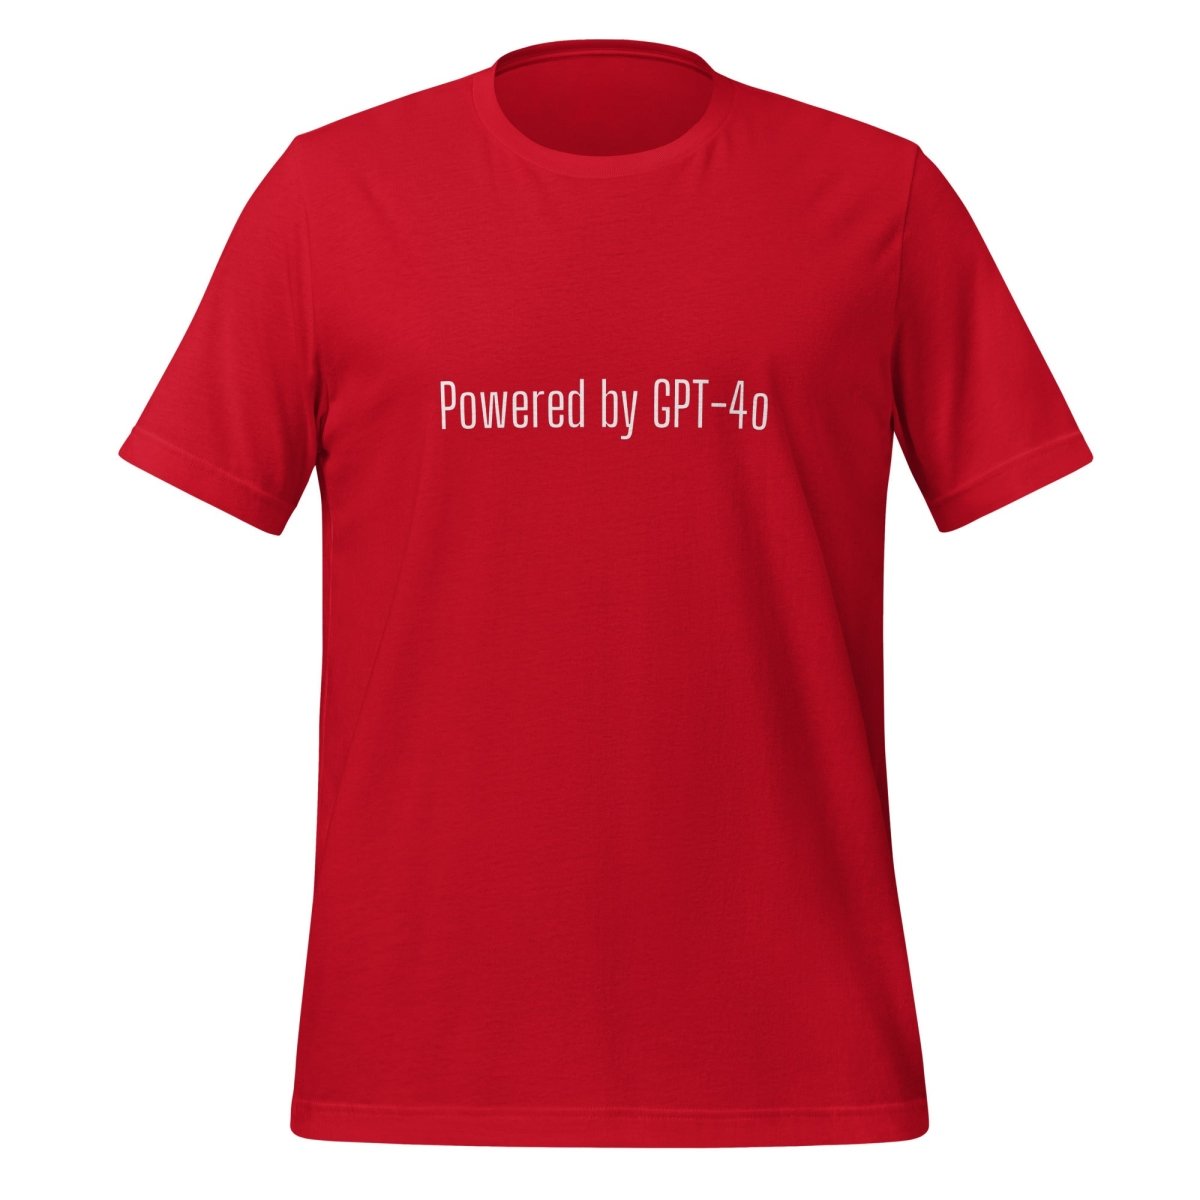 Powered by GPT - 4o T - Shirt 4 (unisex) - Red - AI Store